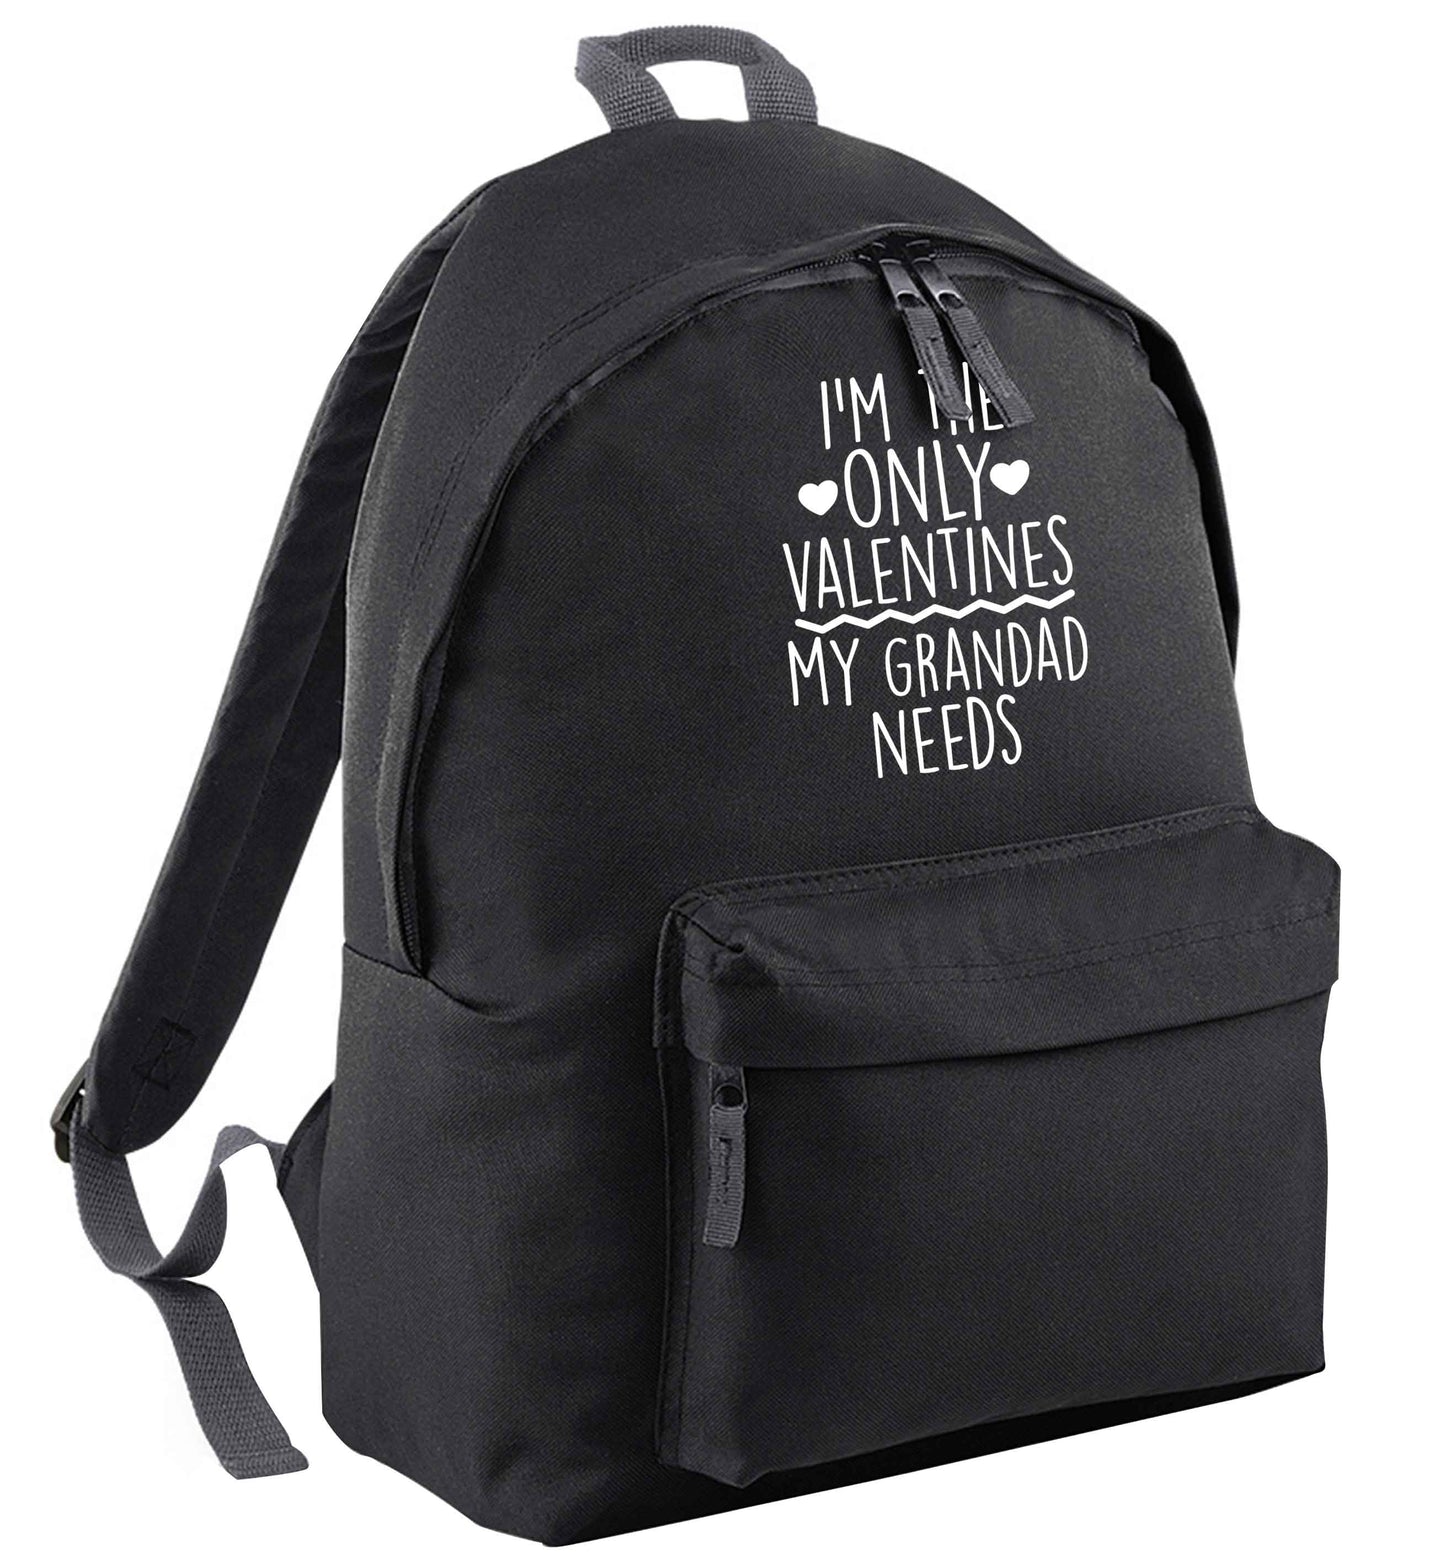 I'm the only valentines my grandad needs | Adults backpack